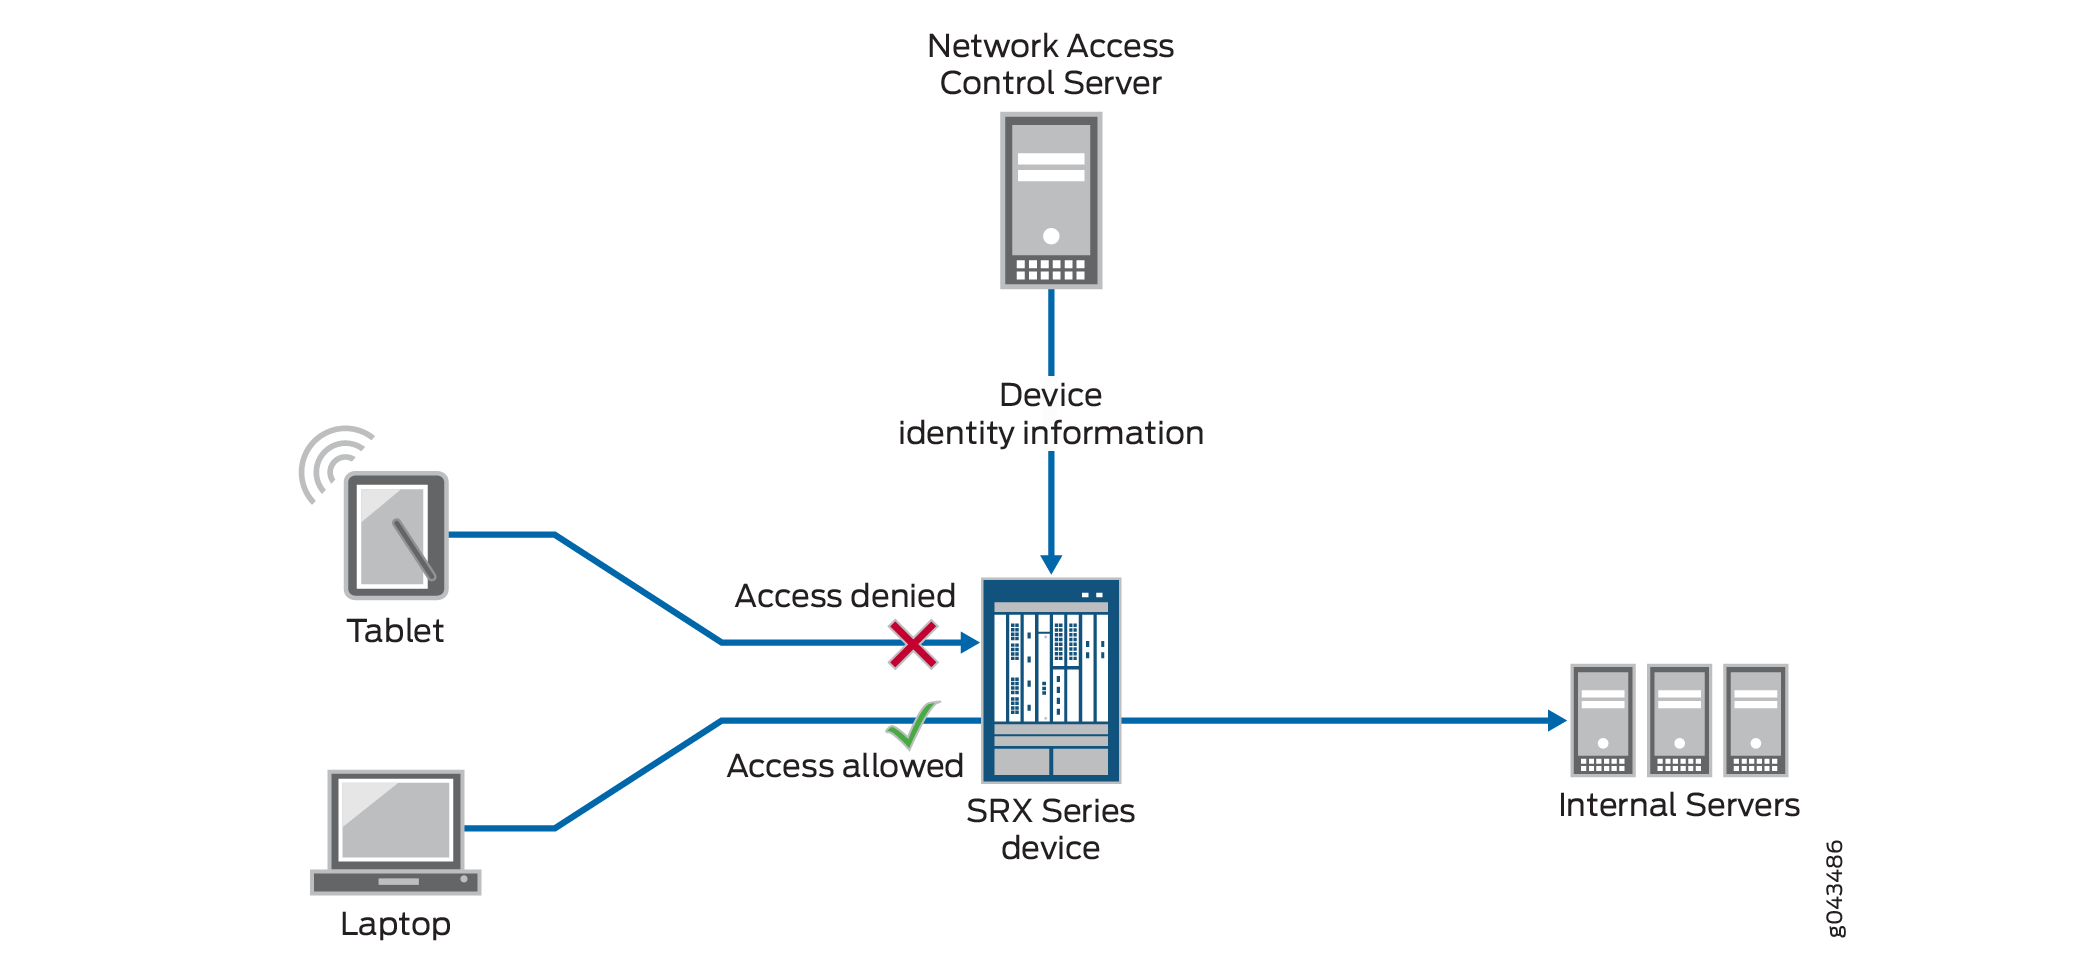 Using a Third-Party Network Access Control (NAC) System for Device Identity Authentication